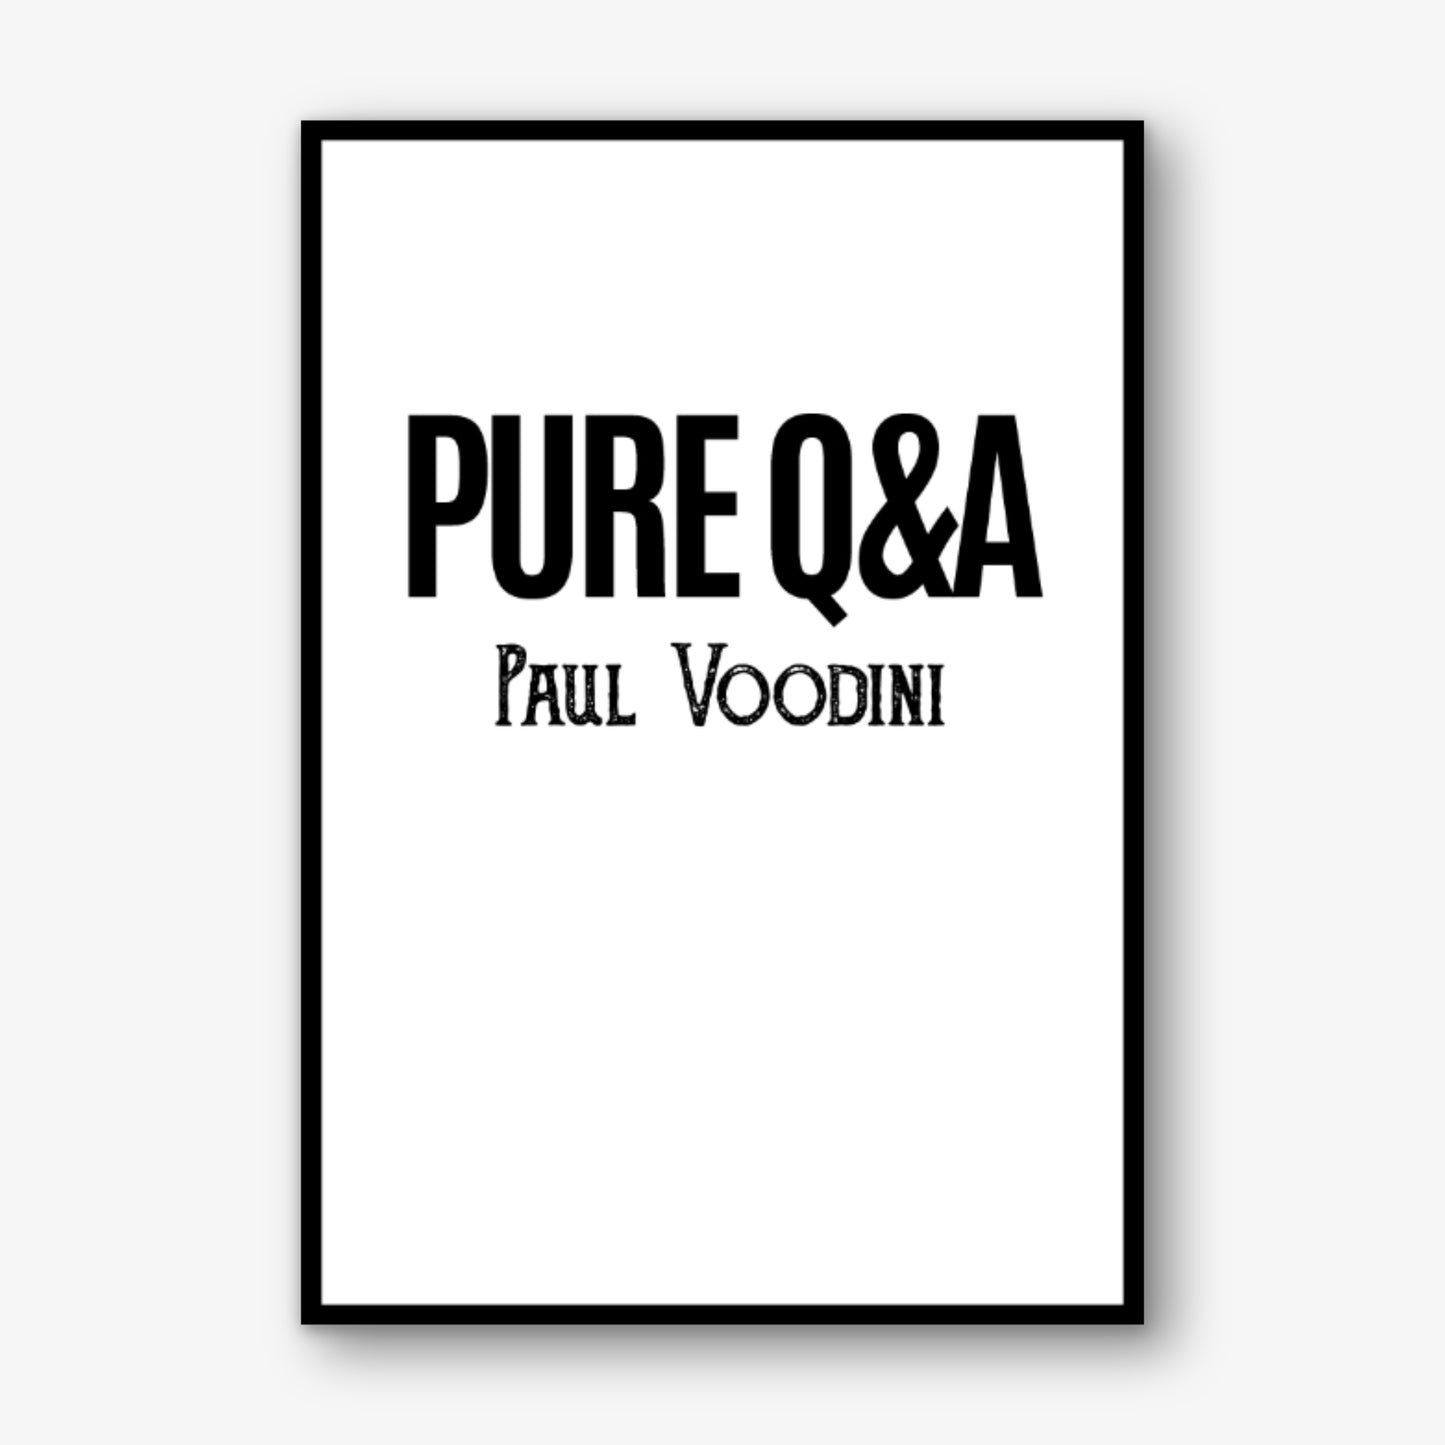 Pure Q&A by Paul Voodini